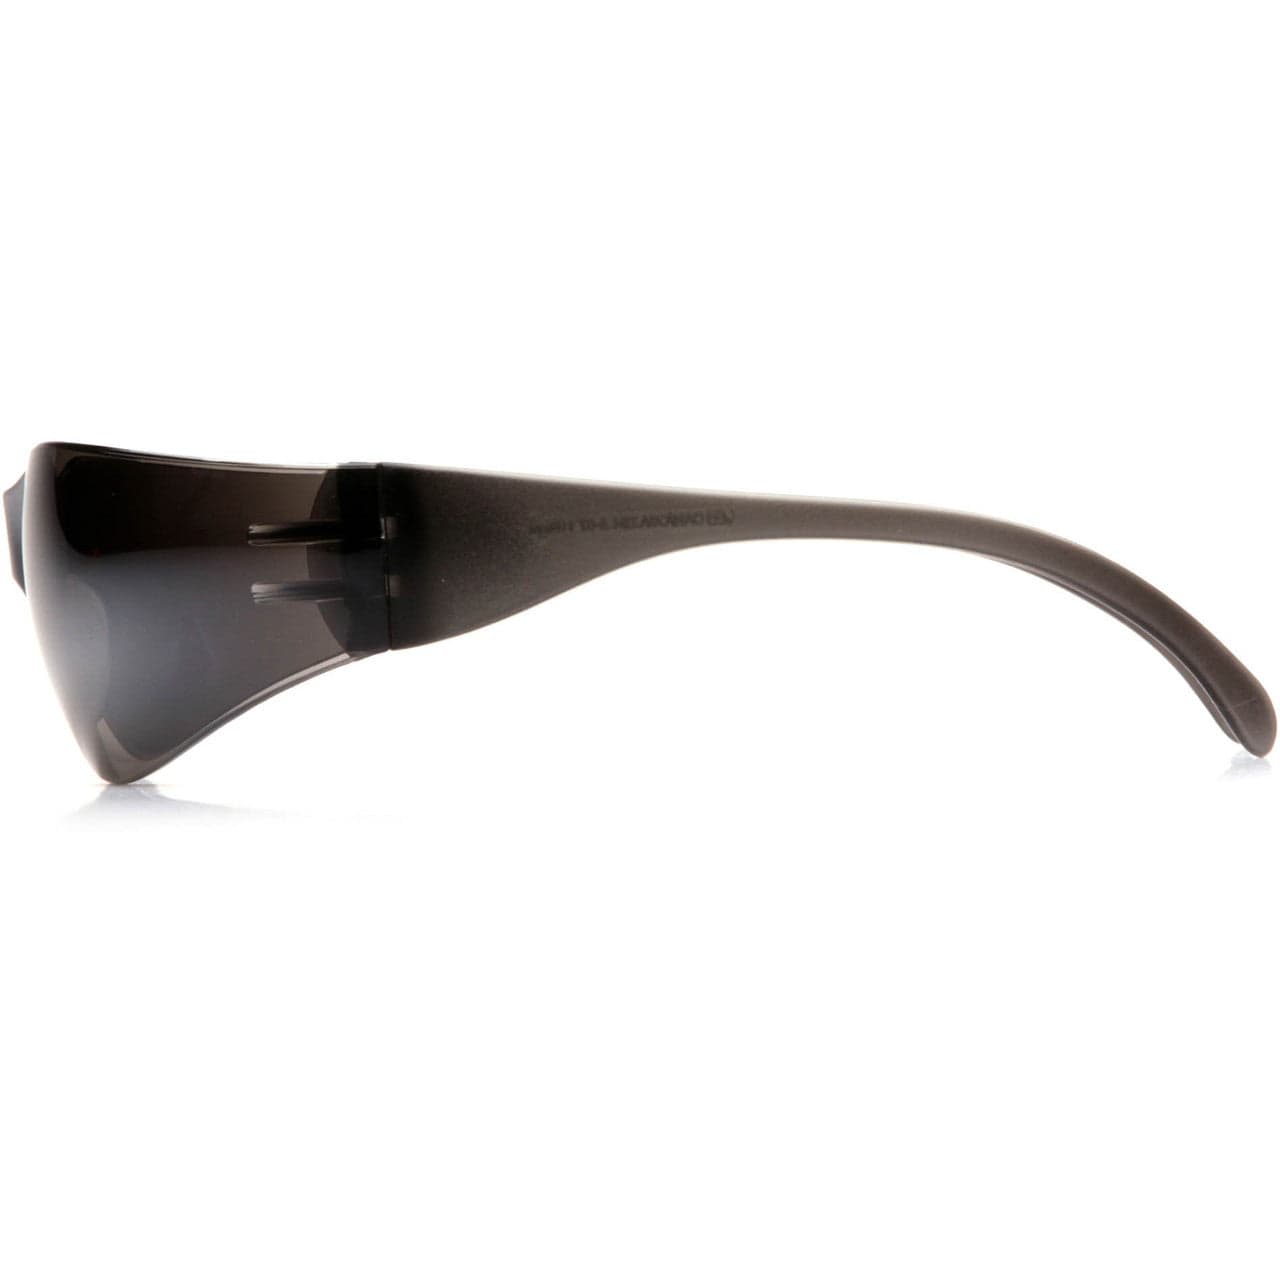 Pyramex Intruder Safety Glasses with Silver Mirror Lens S4170S Side View